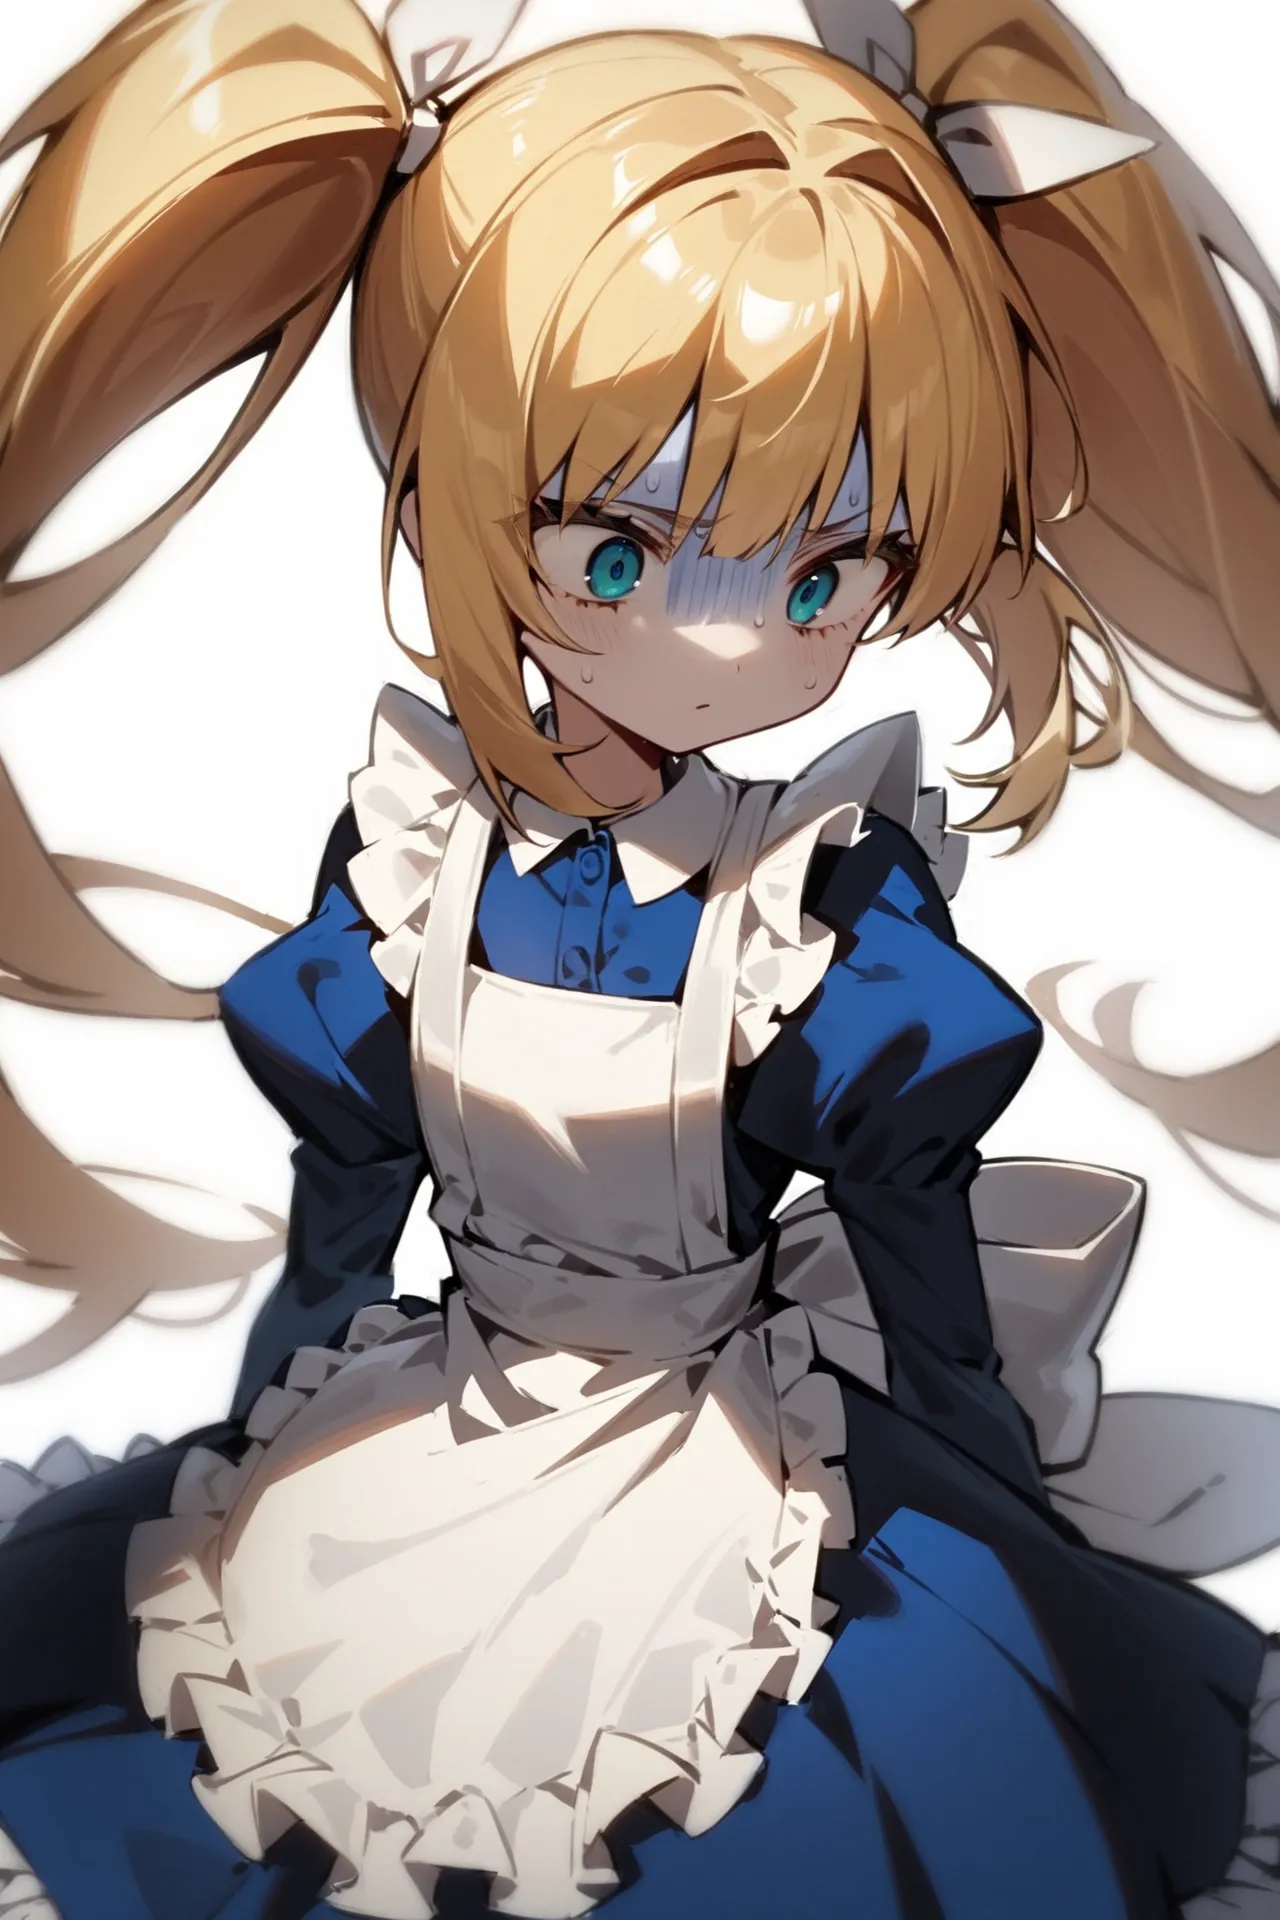 '1girl, turn pale,\nblonde hair, twintails, blue dress, white apron,\nwhite background,\nAlice in glitterworld\nNegative prompt: (worst quality, low quality:1.4), nsfw\nSteps: 35, Sampler: DPM++ 2M SDE Karras, CFG scale: 7, Seed: 1, Size: 640x960, Model hash: 642b08ca49, Model: ConfusionXL2.0_fp16_vae, VAE hash: 63aeecb90f, VAE: sdxl_vae_0.9.safetensors, Denoising strength: 0.6, Clip skip: 2, Hires upscale: 2, Hires steps: 15, Hires upscaler: ESRGAN_4x, Eta: 0.68, Version: v1.7.0'